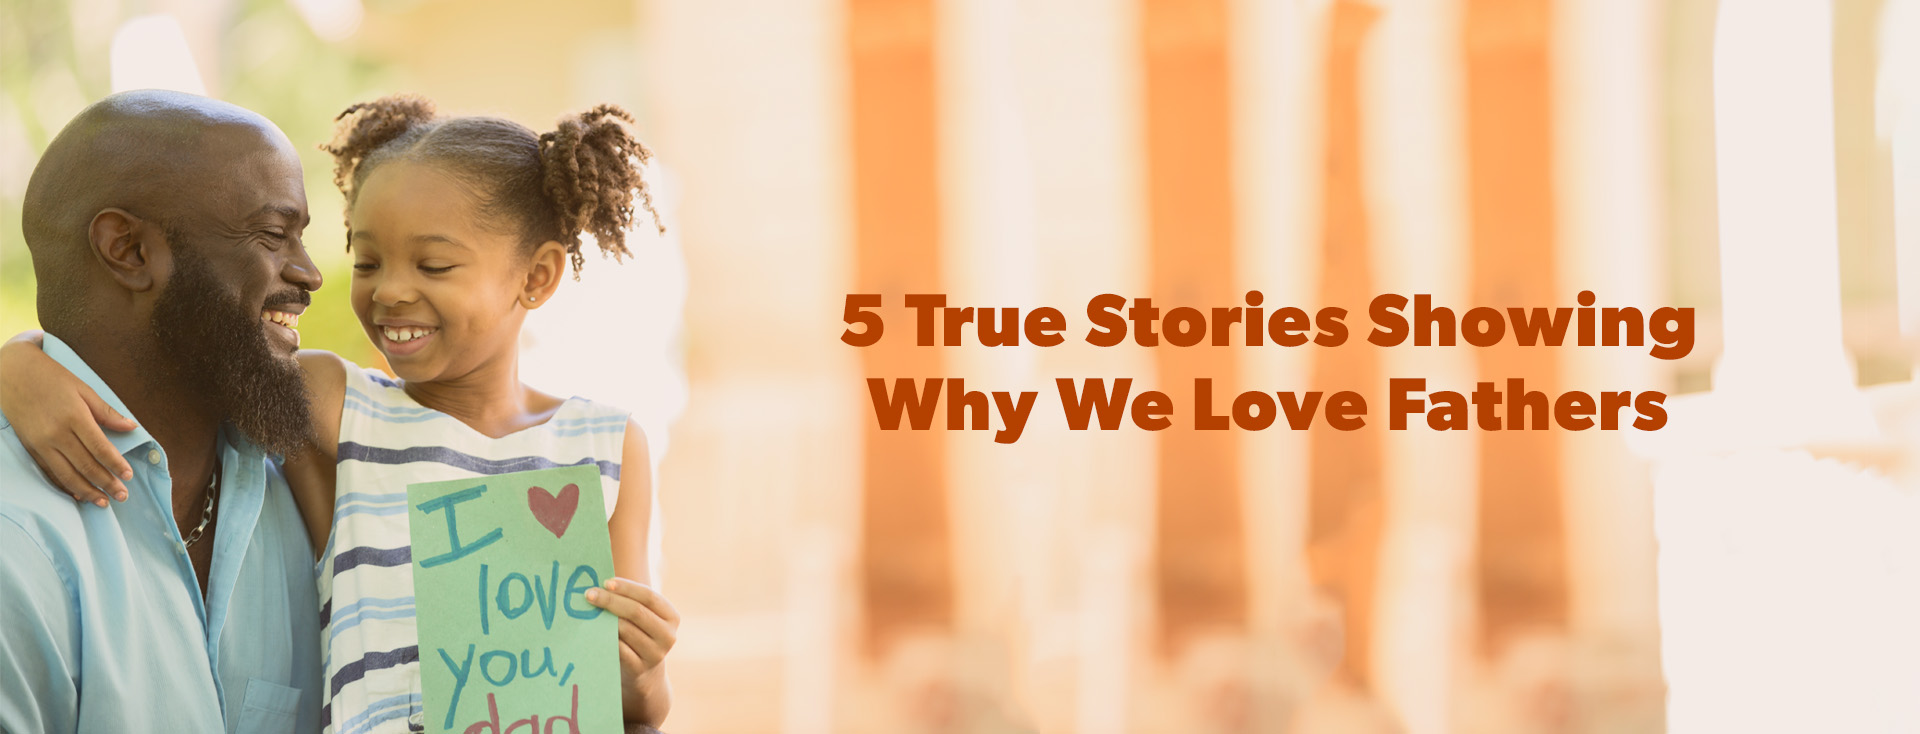 5 true stories showing why we love fathers